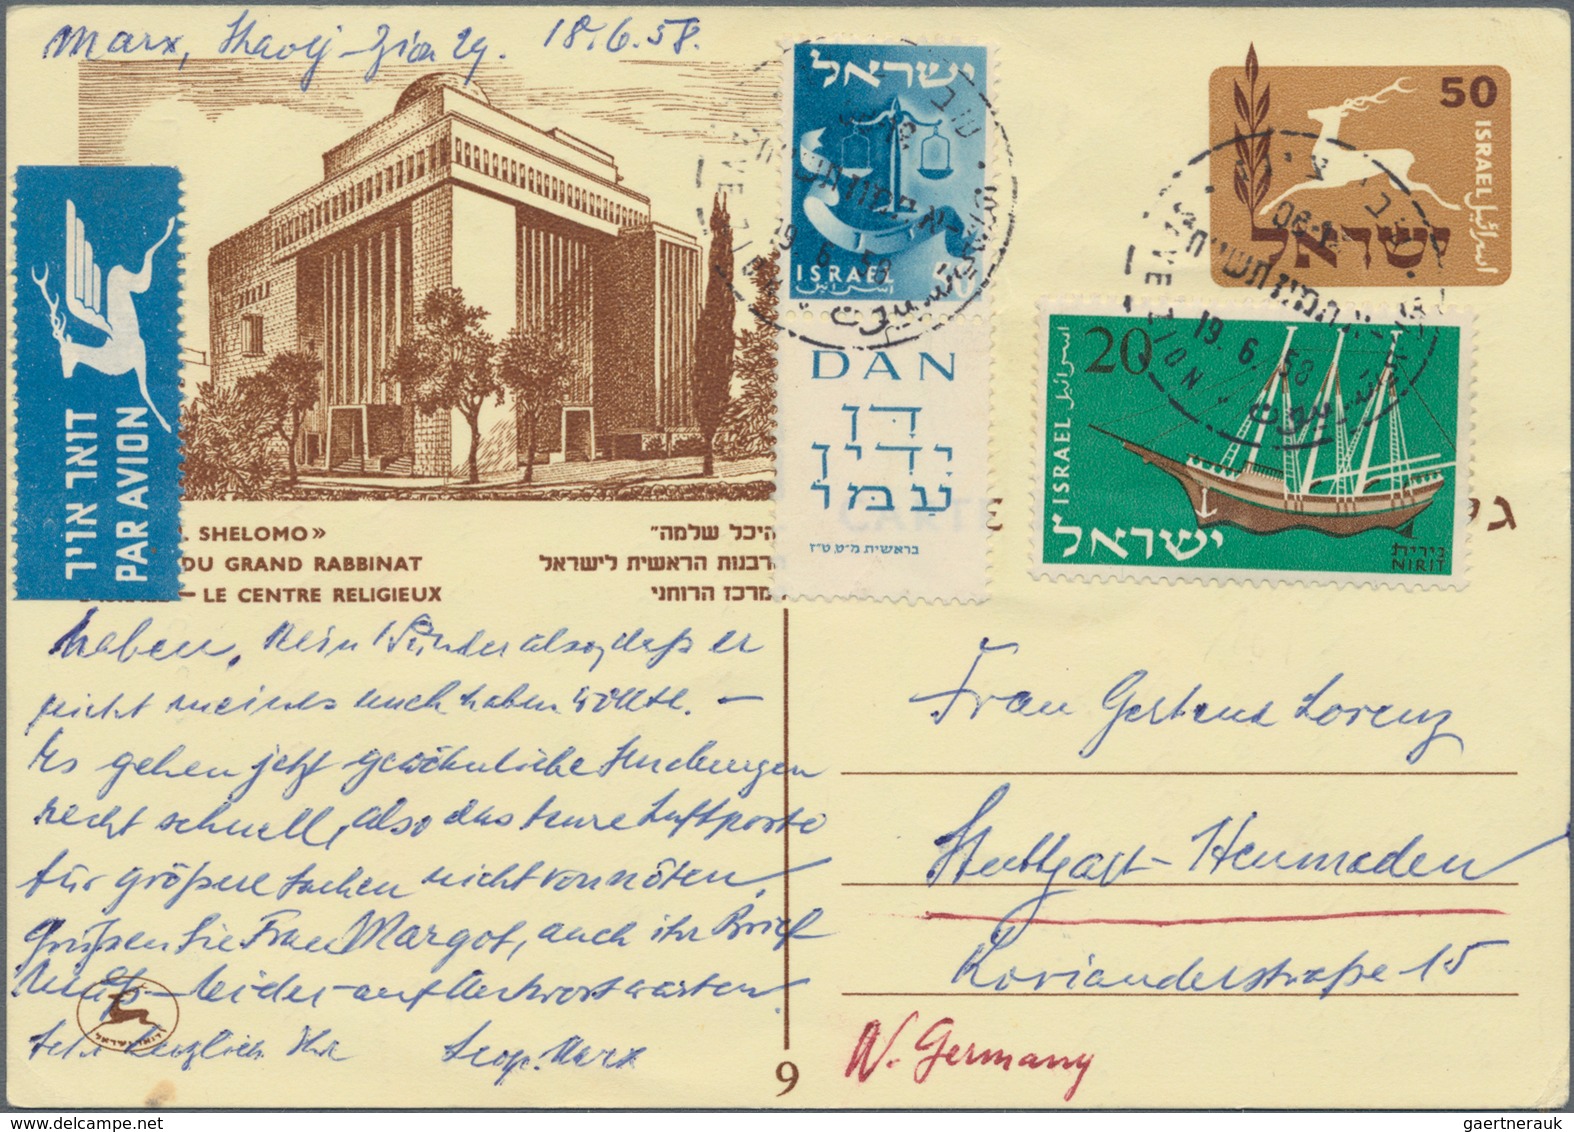 Israel: 1950/2008, STATIONERIES, holding of apprx. 520 unused and used cards/aerogrammes/envelopes,